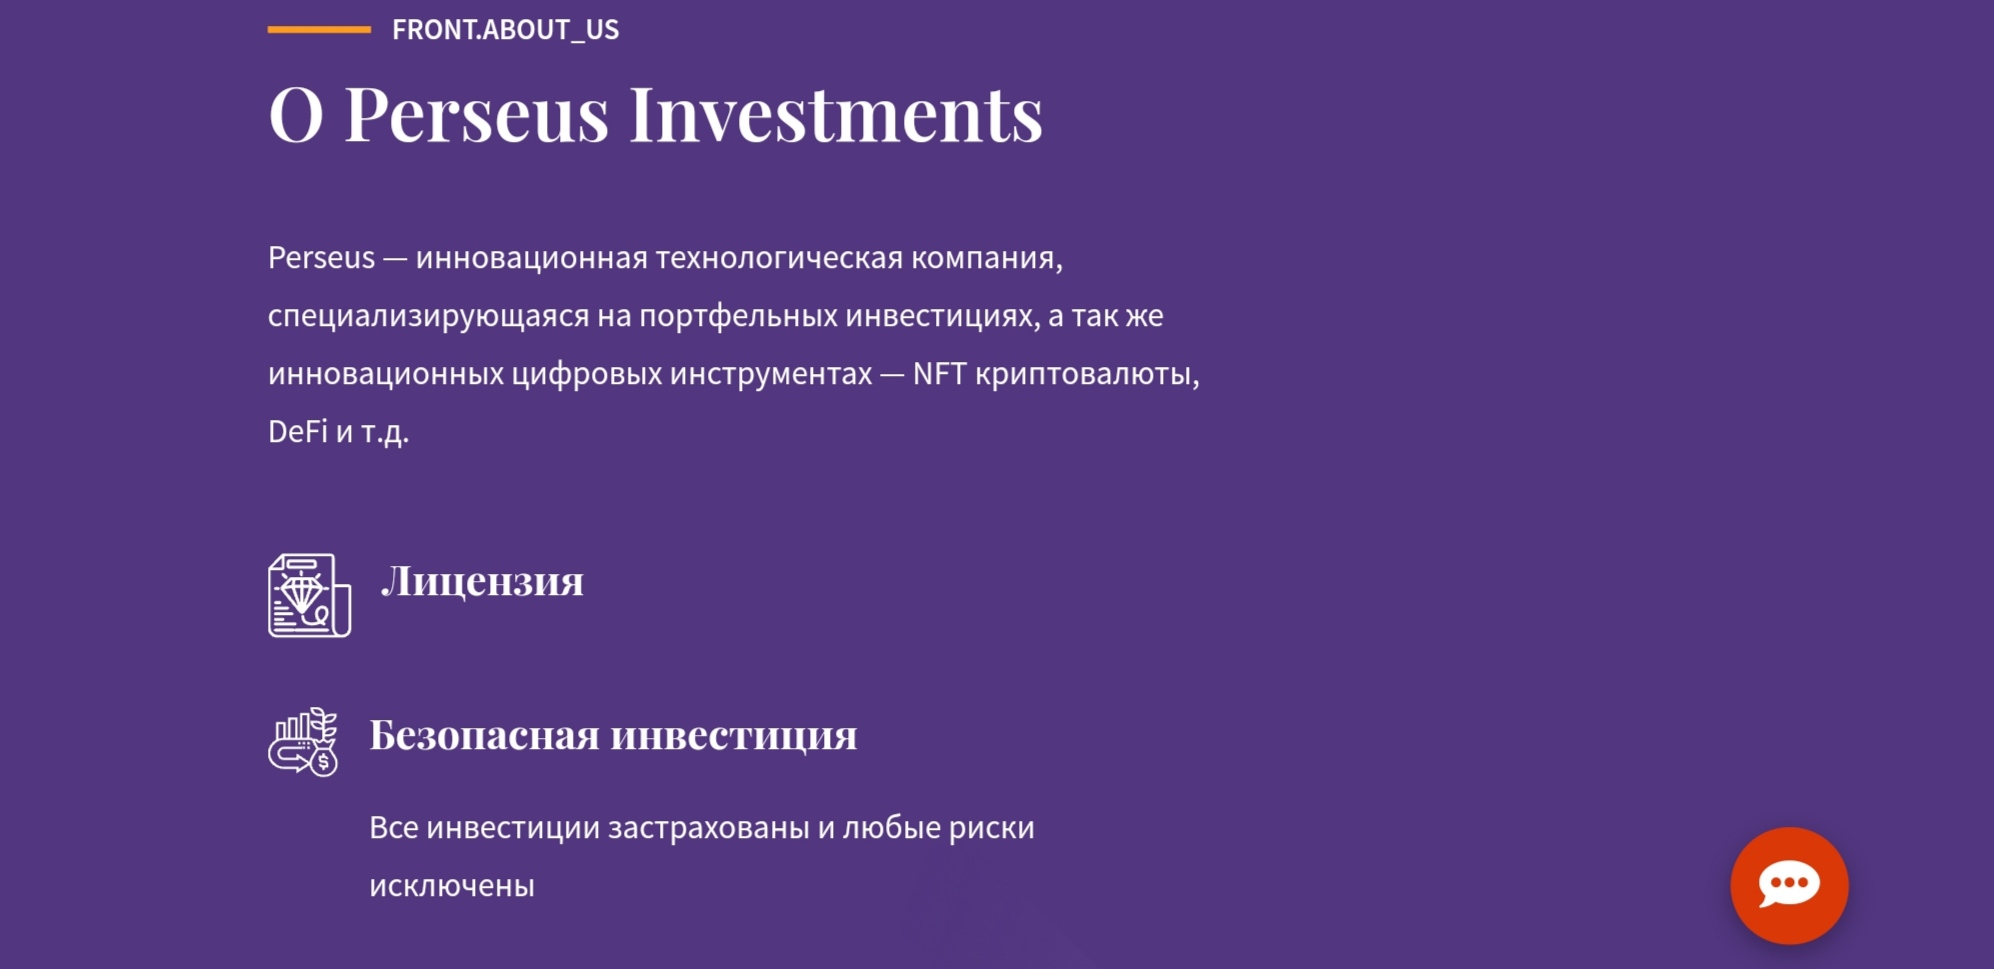 Perseus Investments сайт